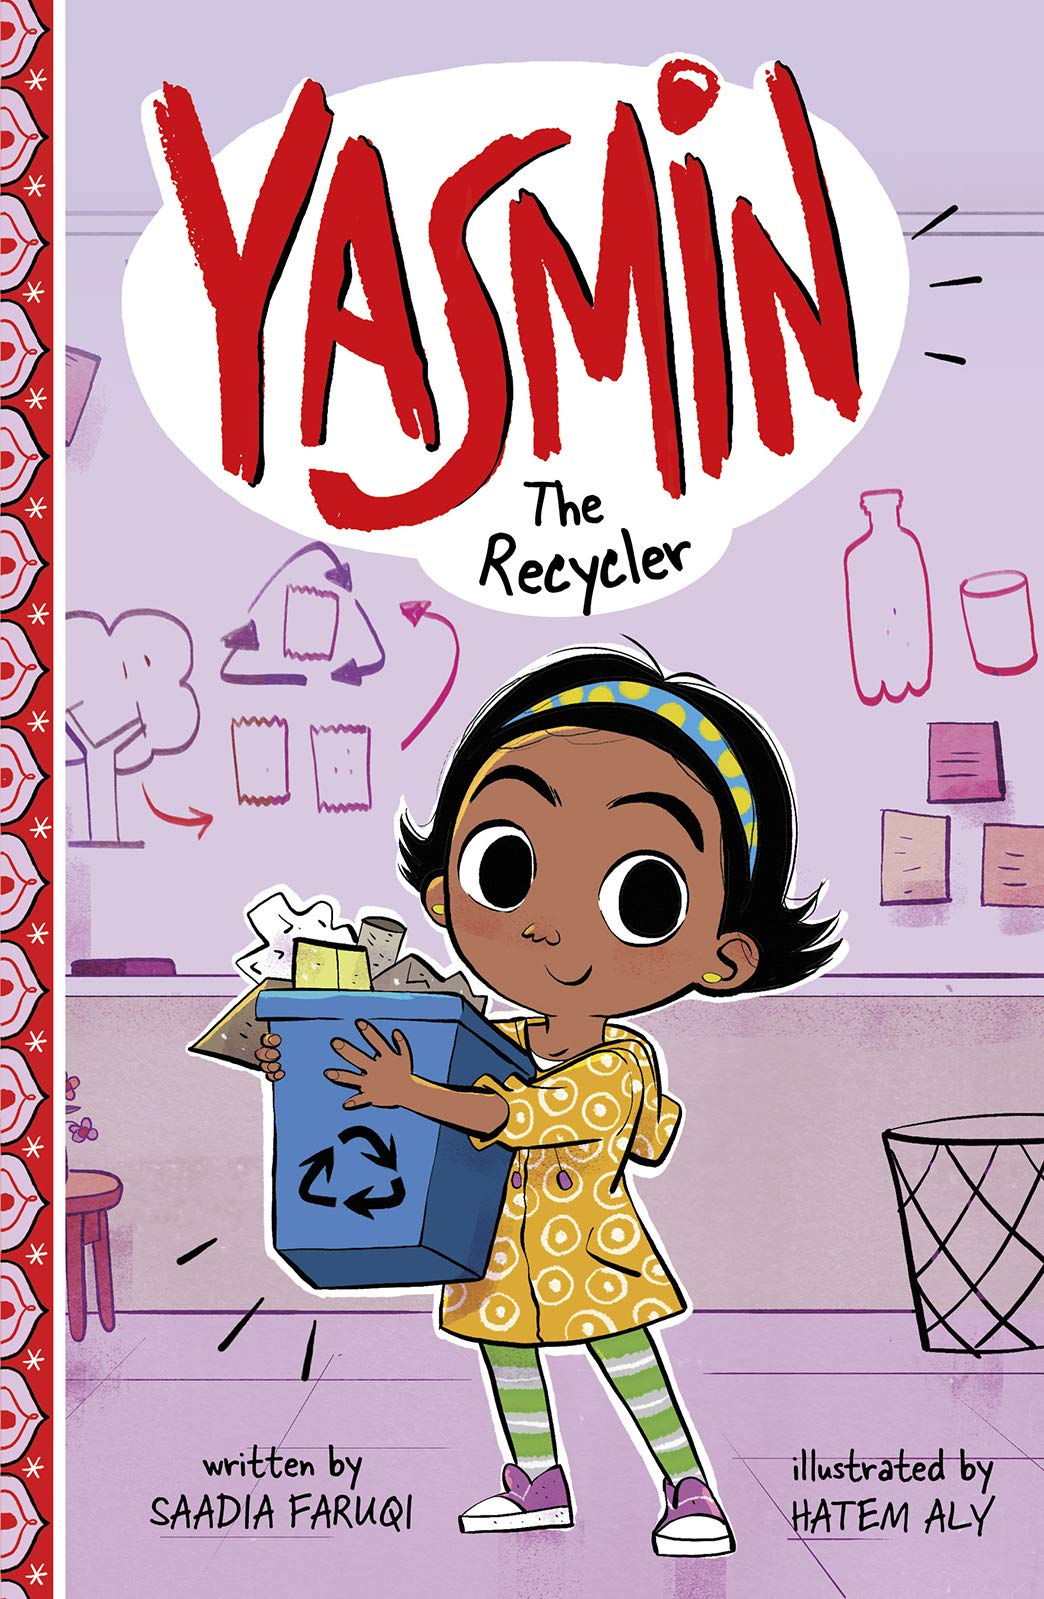 Yasmin The Recycler (Soft Cover)